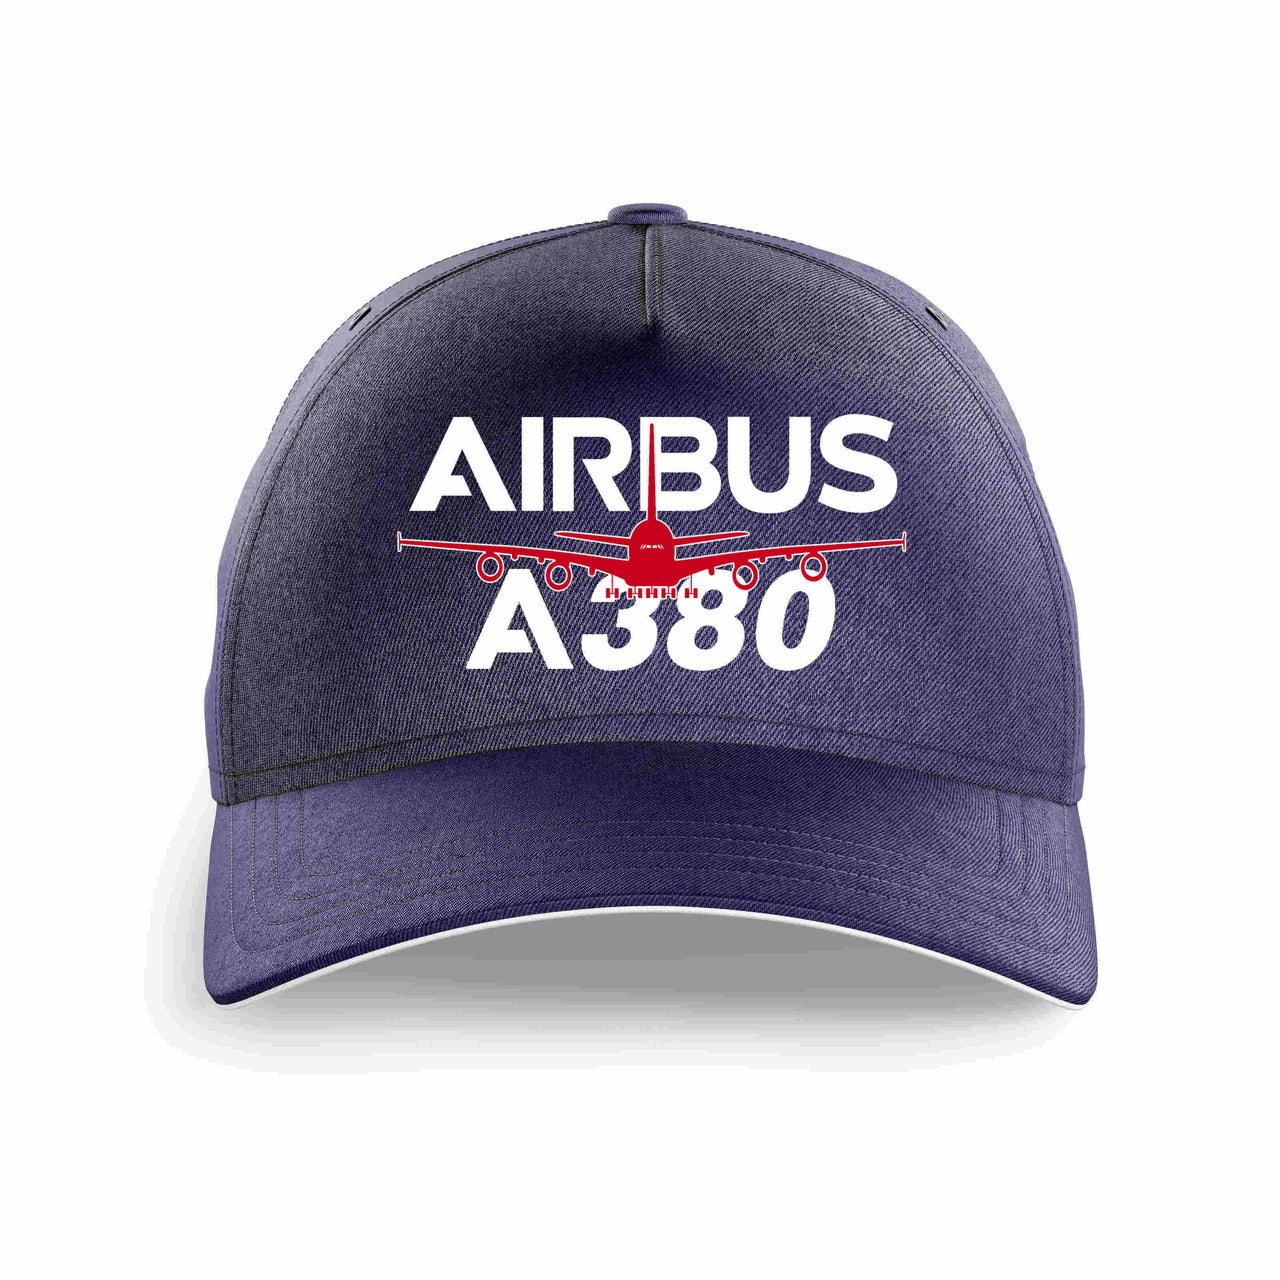 Amazing Airbus A380 Printed Hats